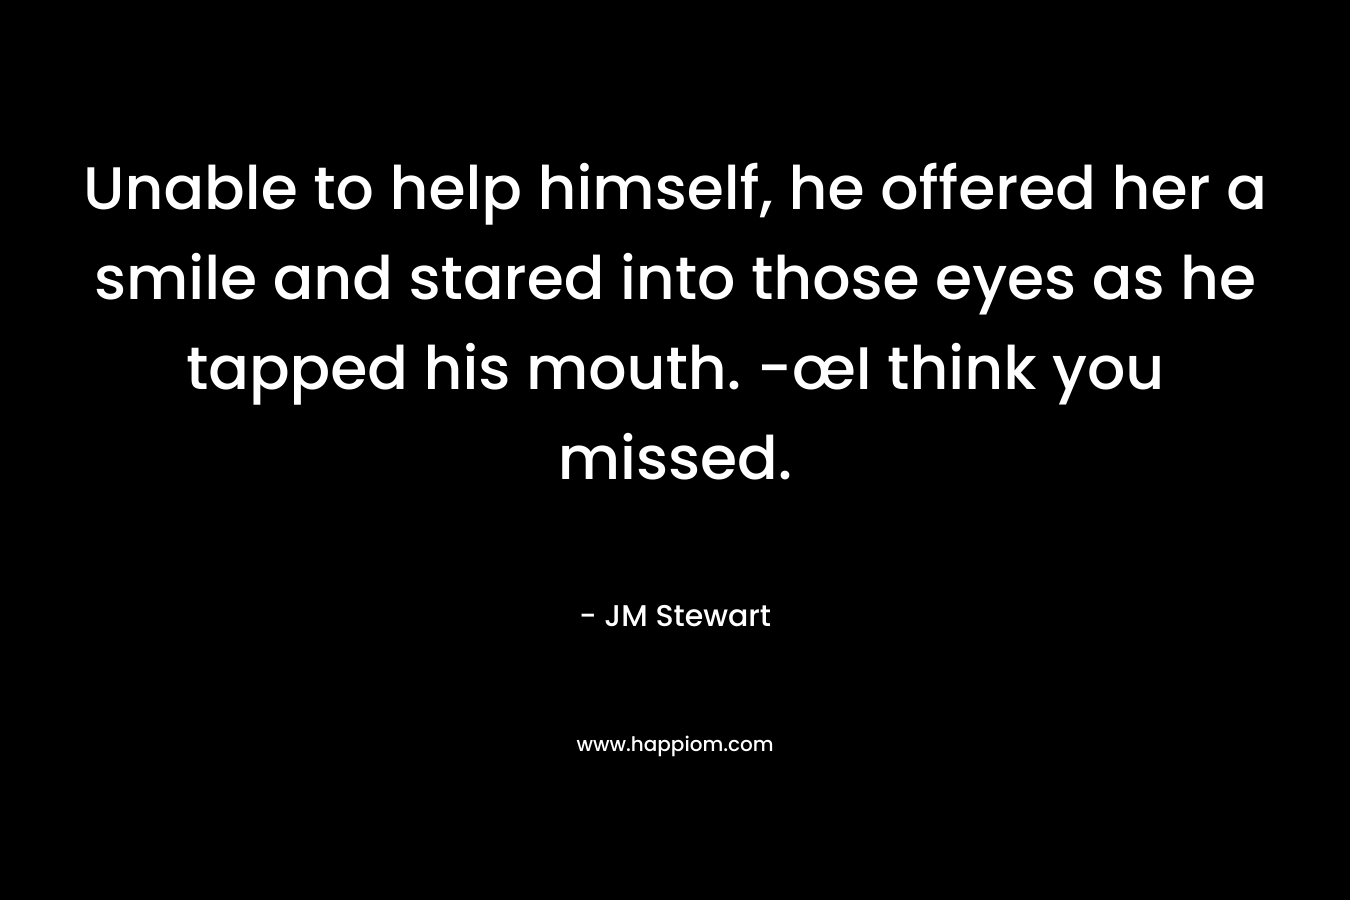 Unable to help himself, he offered her a smile and stared into those eyes as he tapped his mouth. -œI think you missed. – JM Stewart